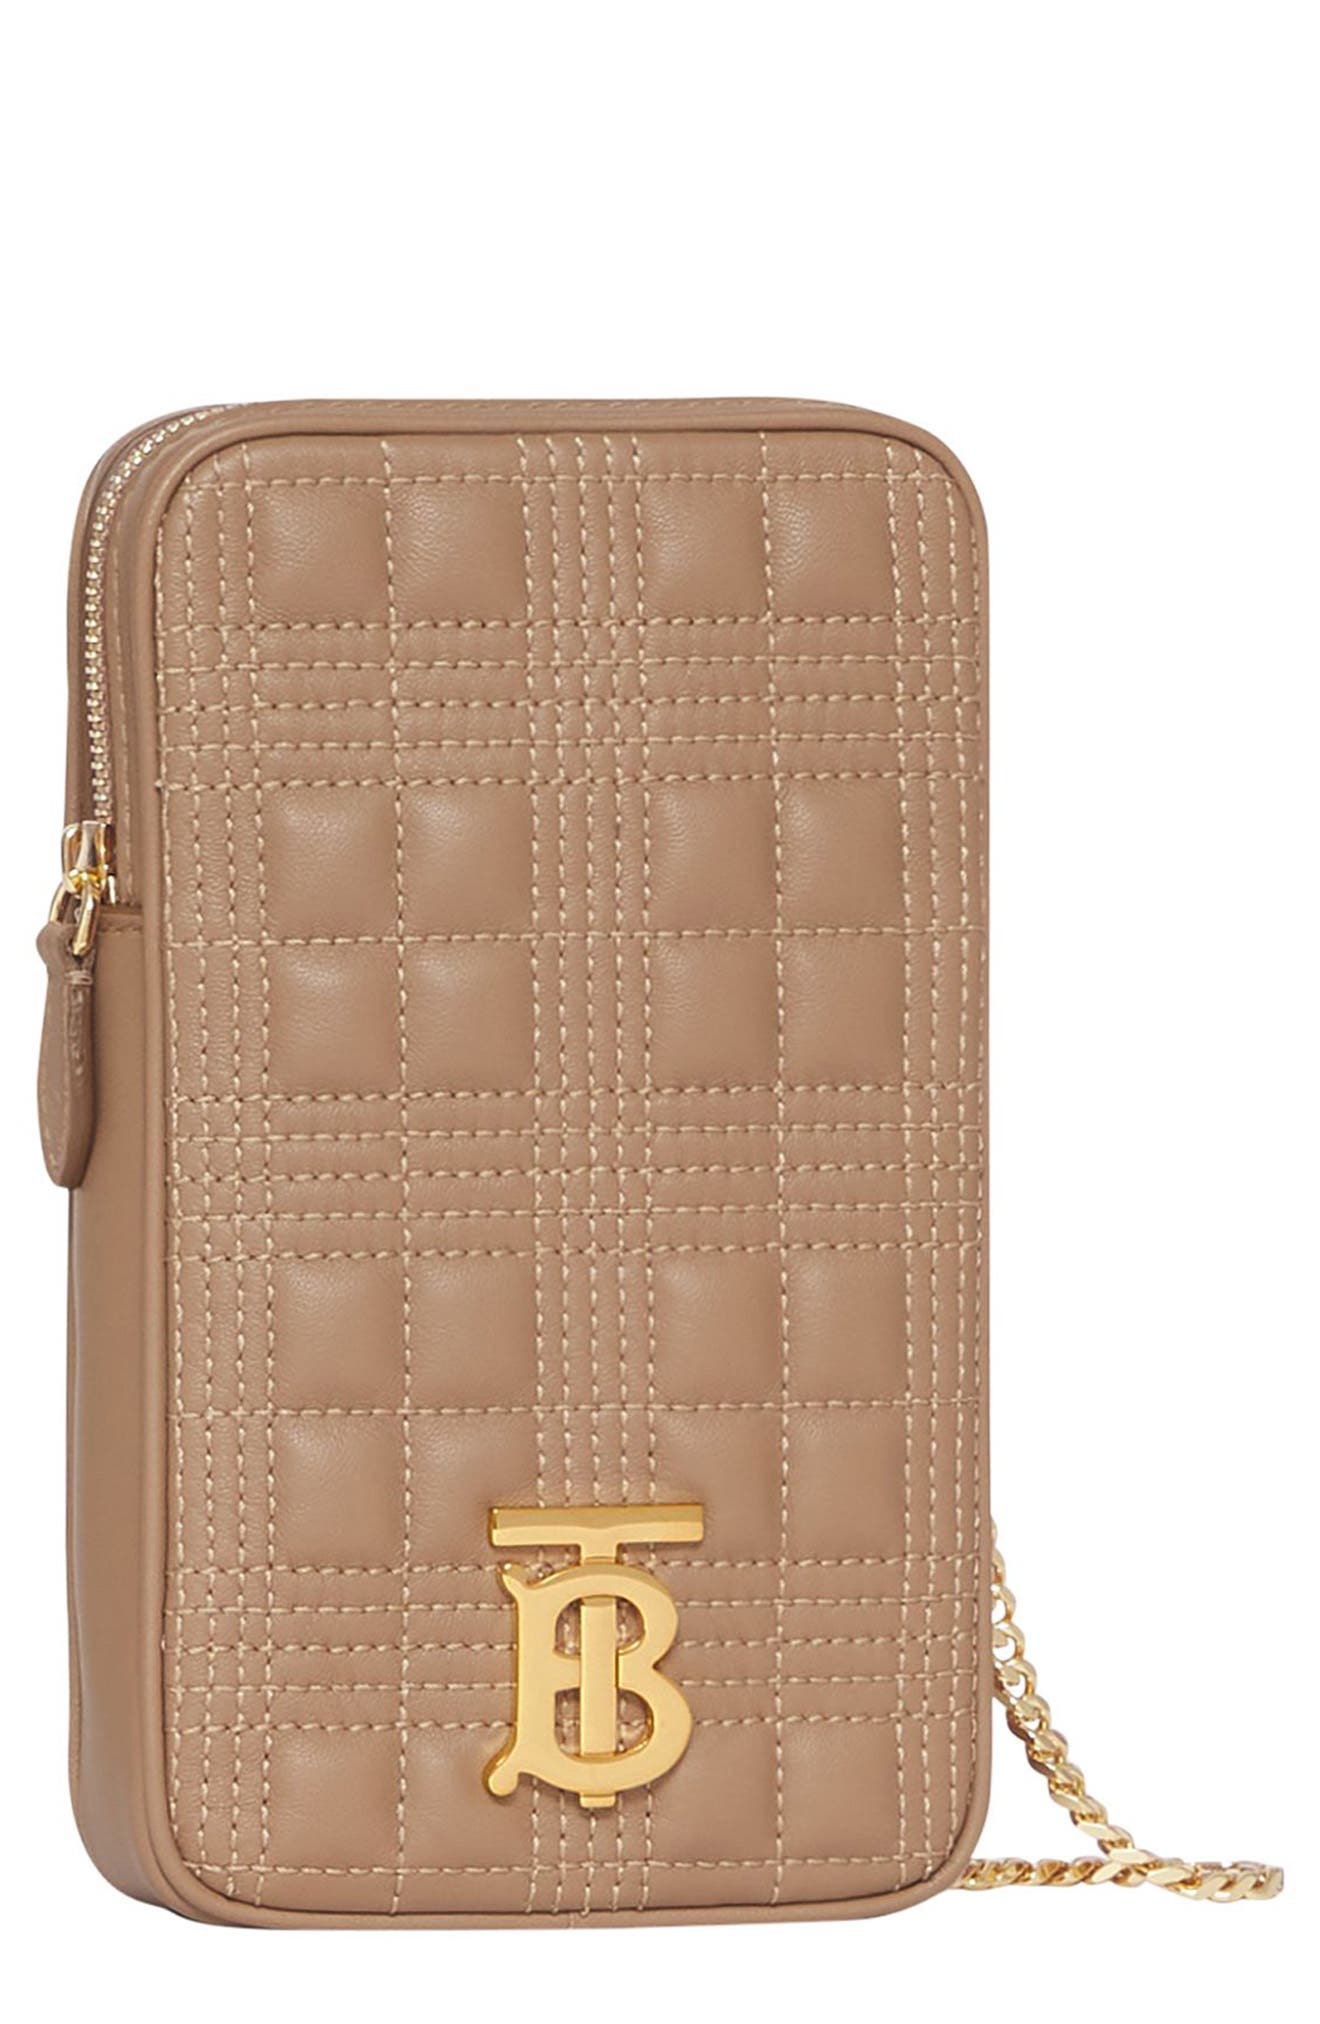 Burberry Mini Lola Check Quilted Leather Pouch in Camel at Nordstrom